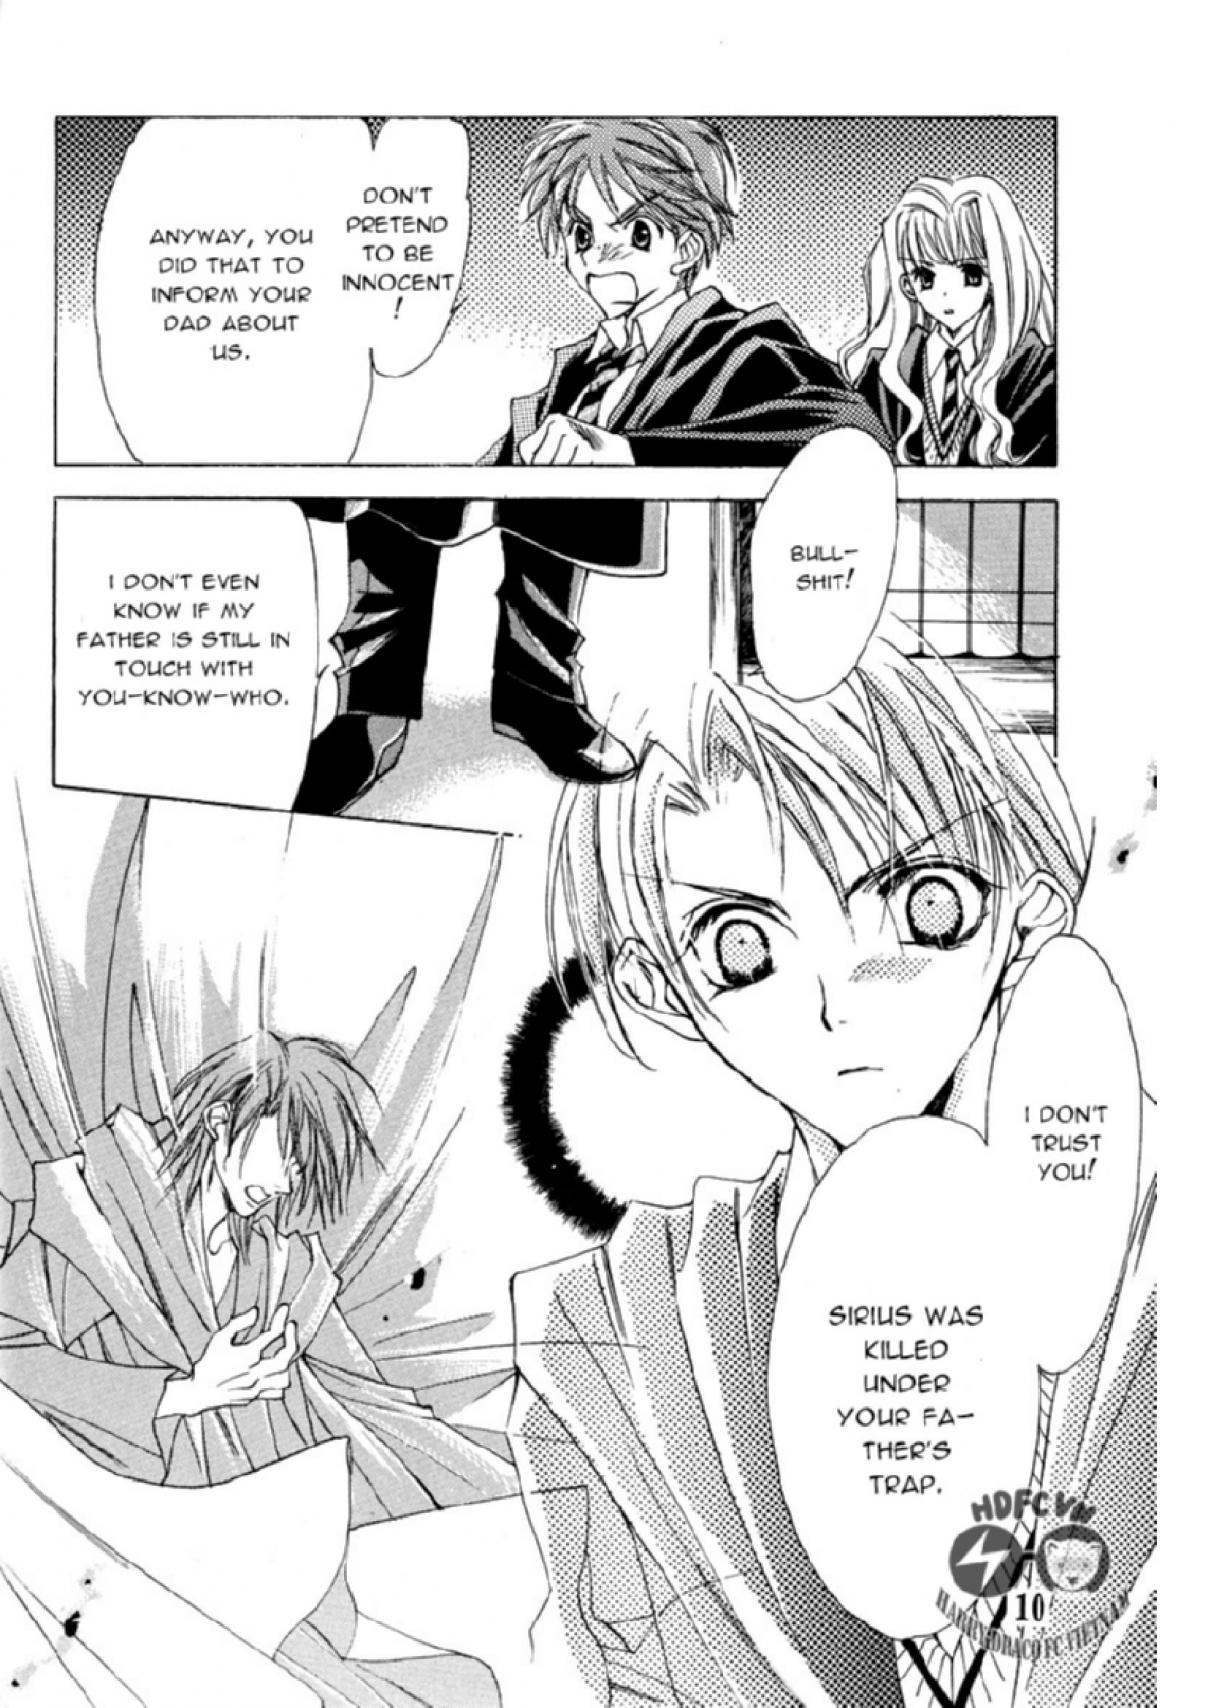 Harry Potter In the bed of the crescent moonlight (Doujinshi) Oneshot